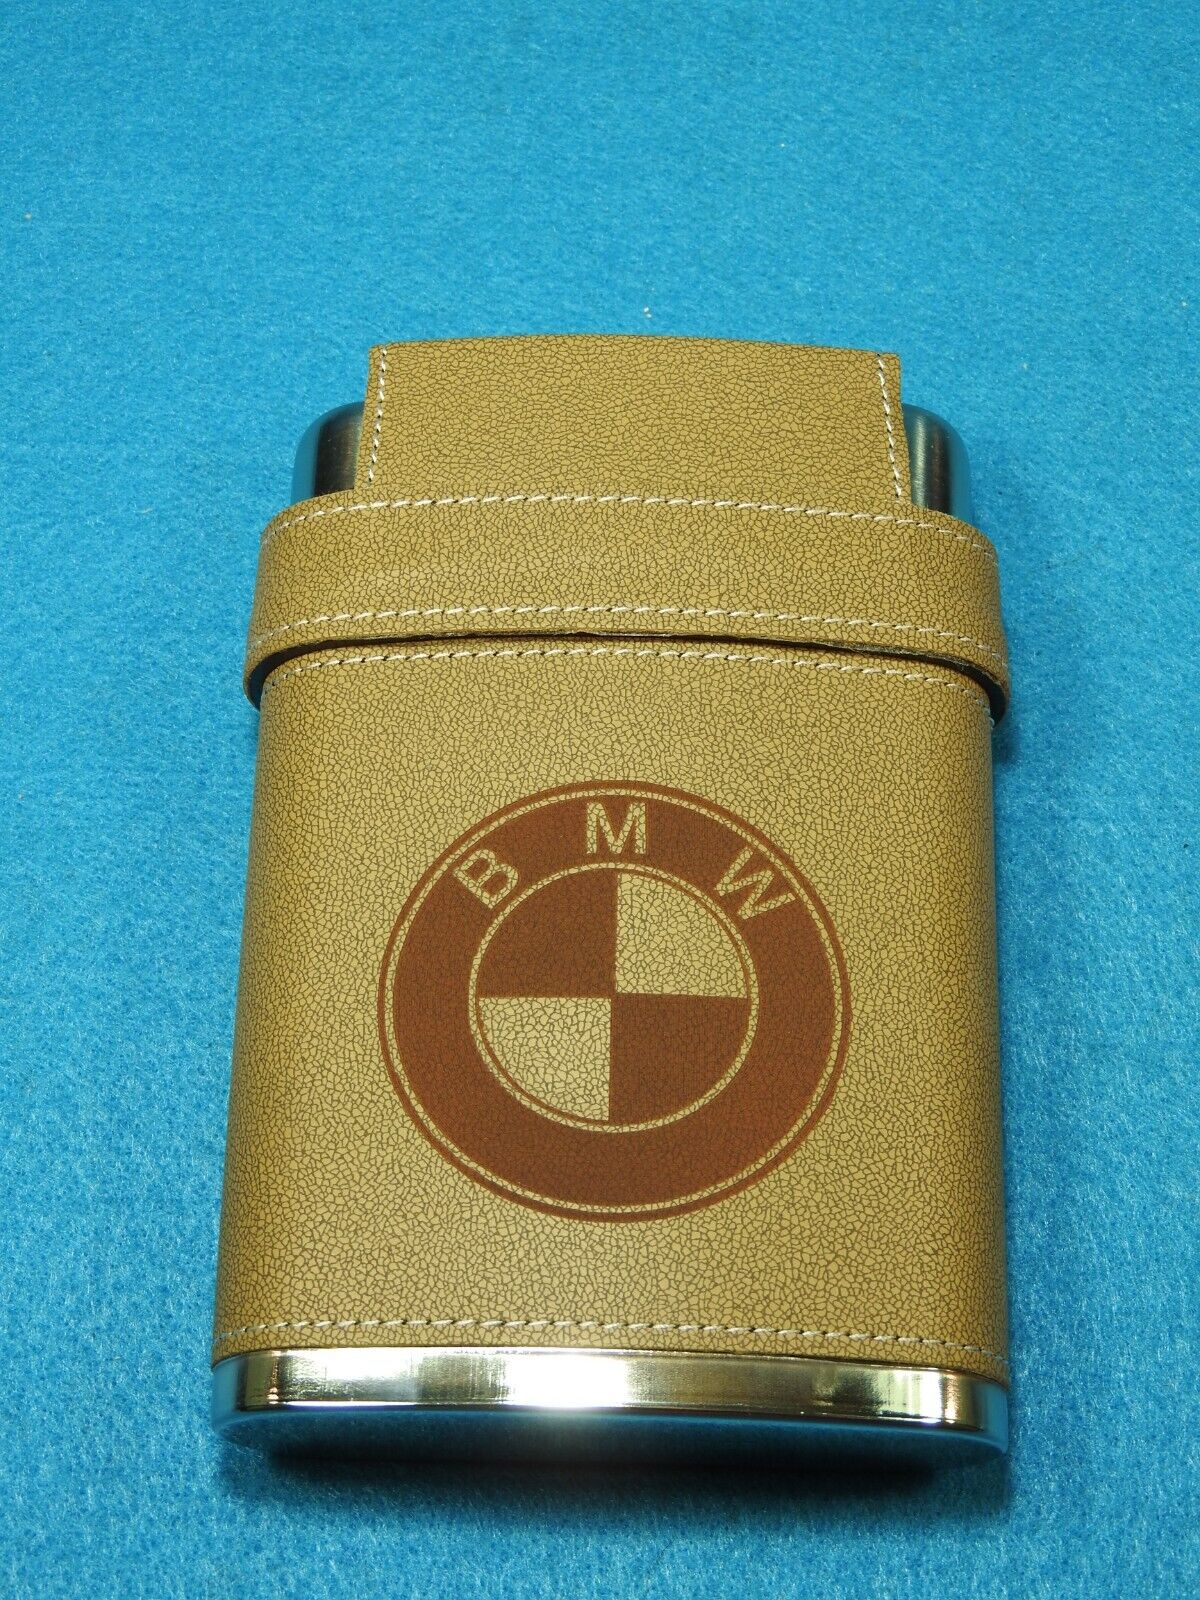 BMW 7oz. Flask with Lid that Holds 3 Shot Glasses - New